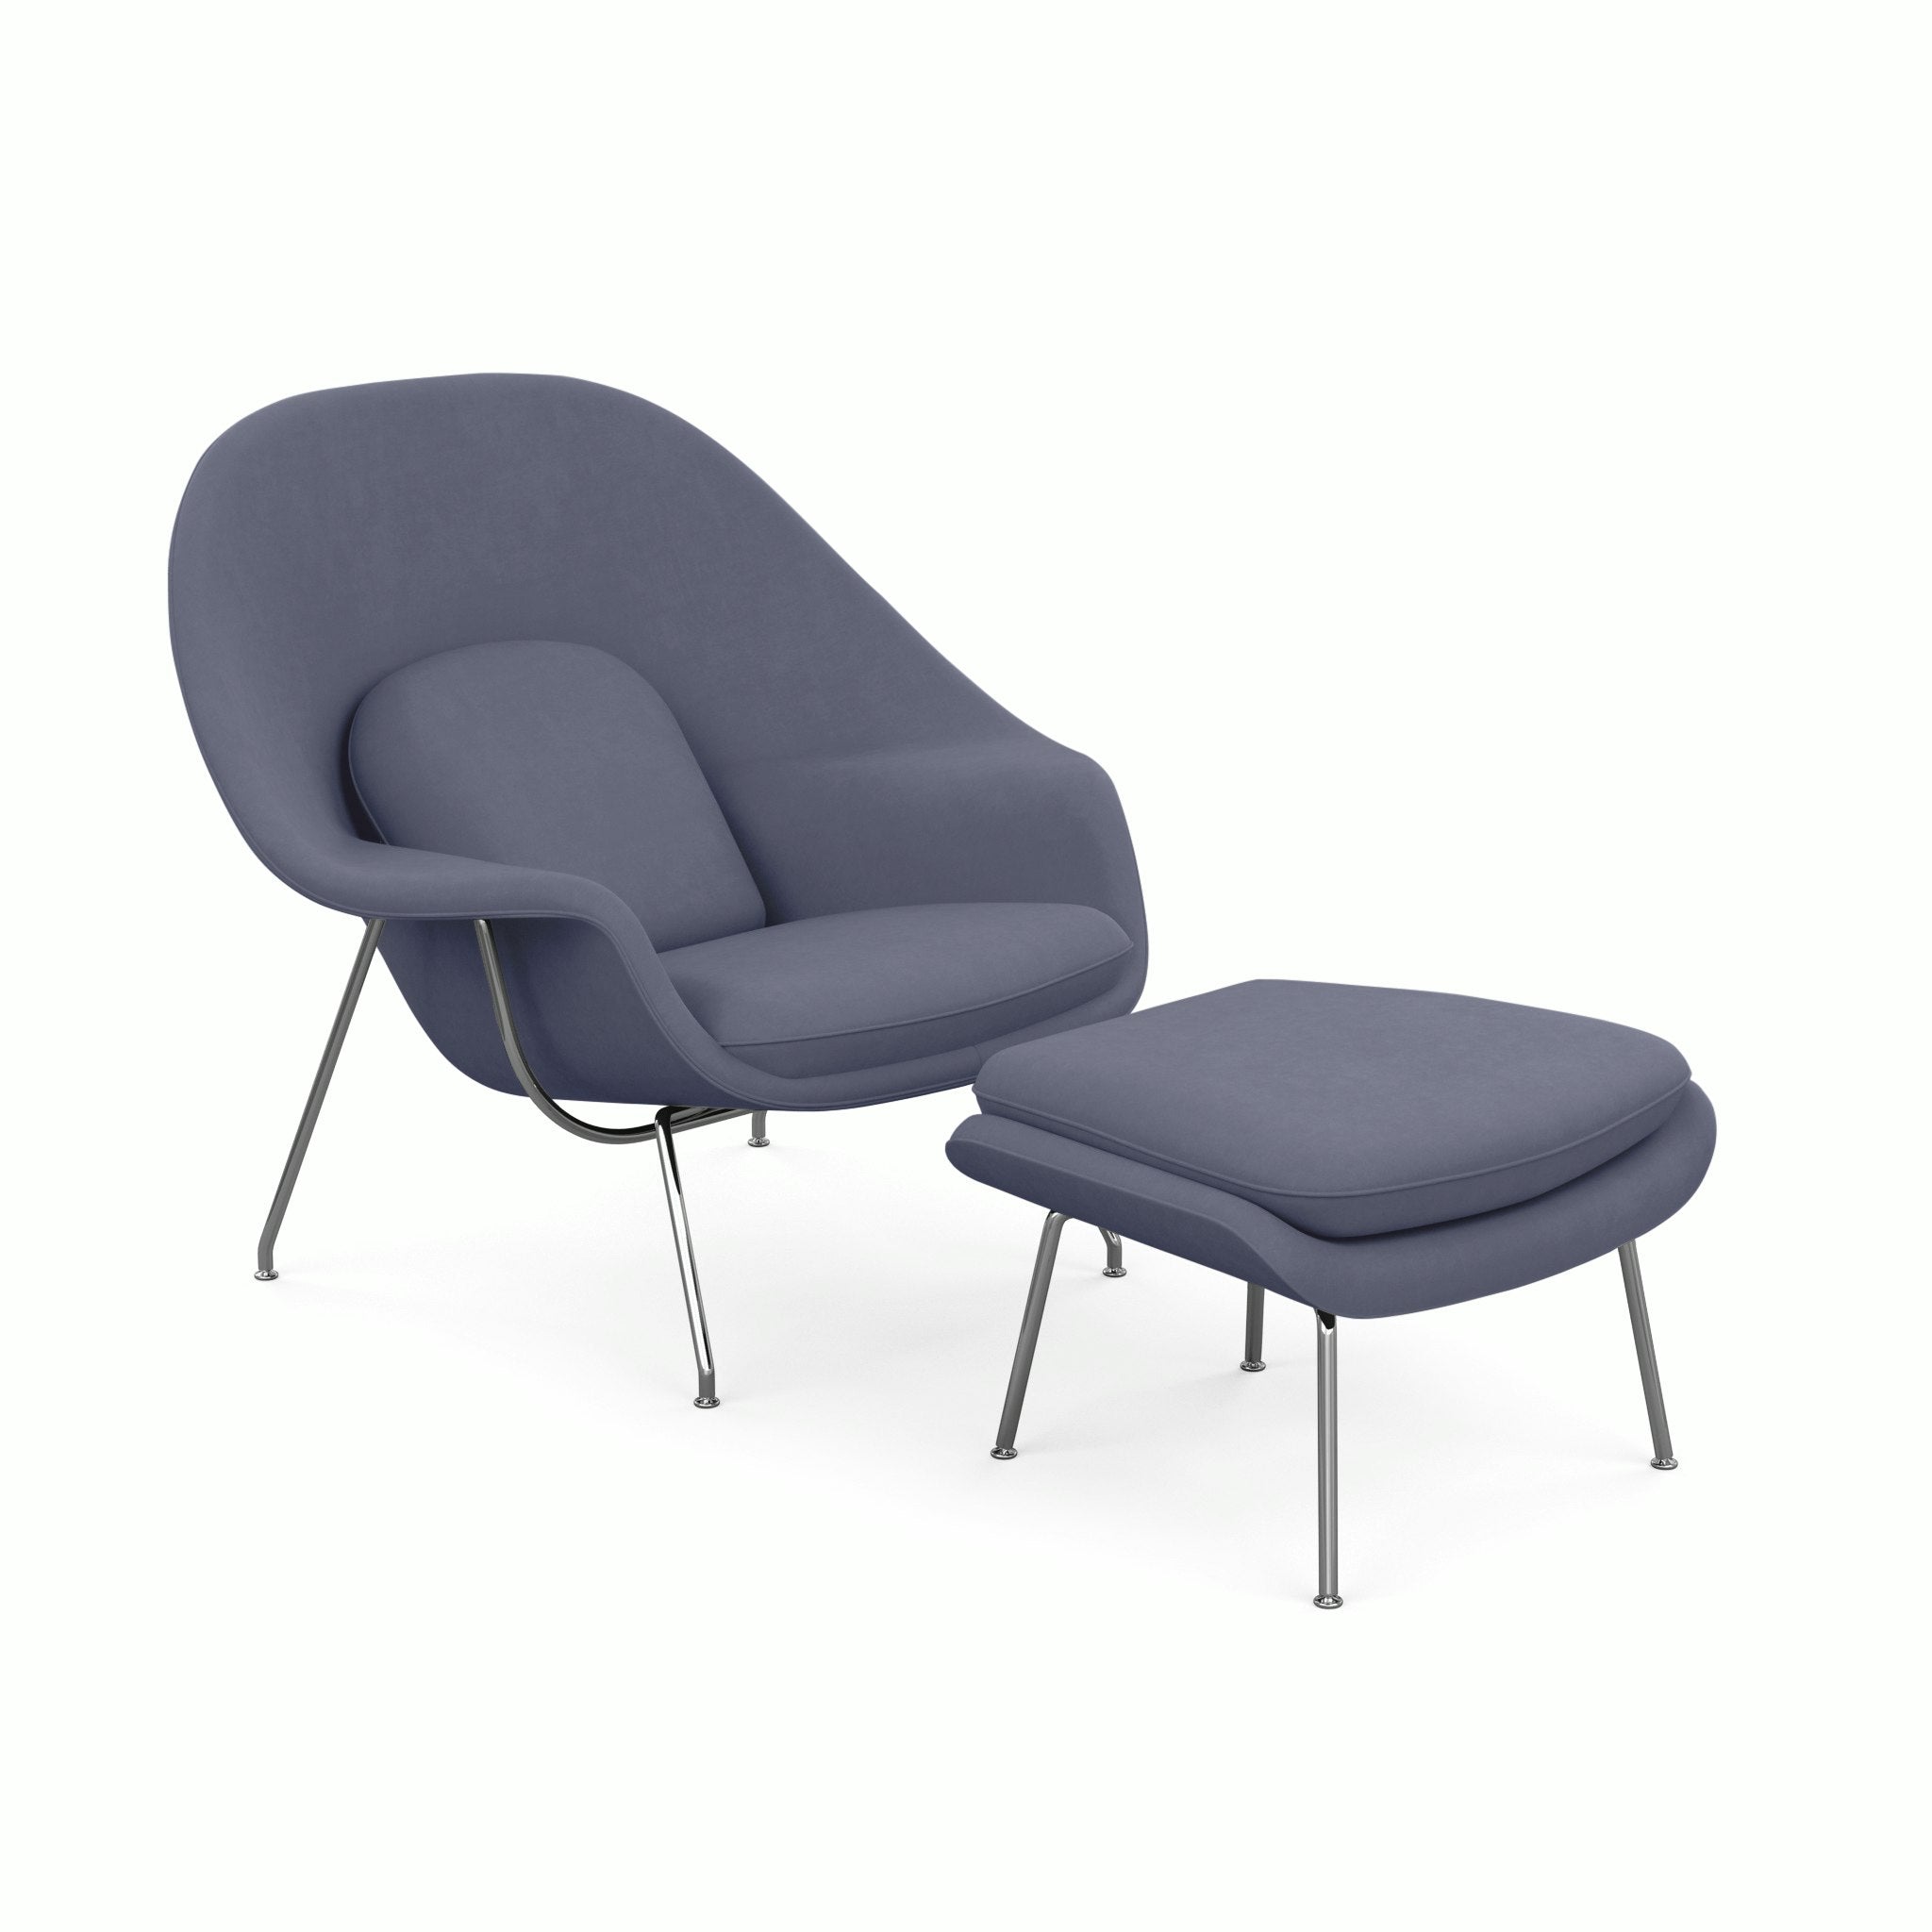 Womb Lounge Chair And Ottoman (Reproduction)